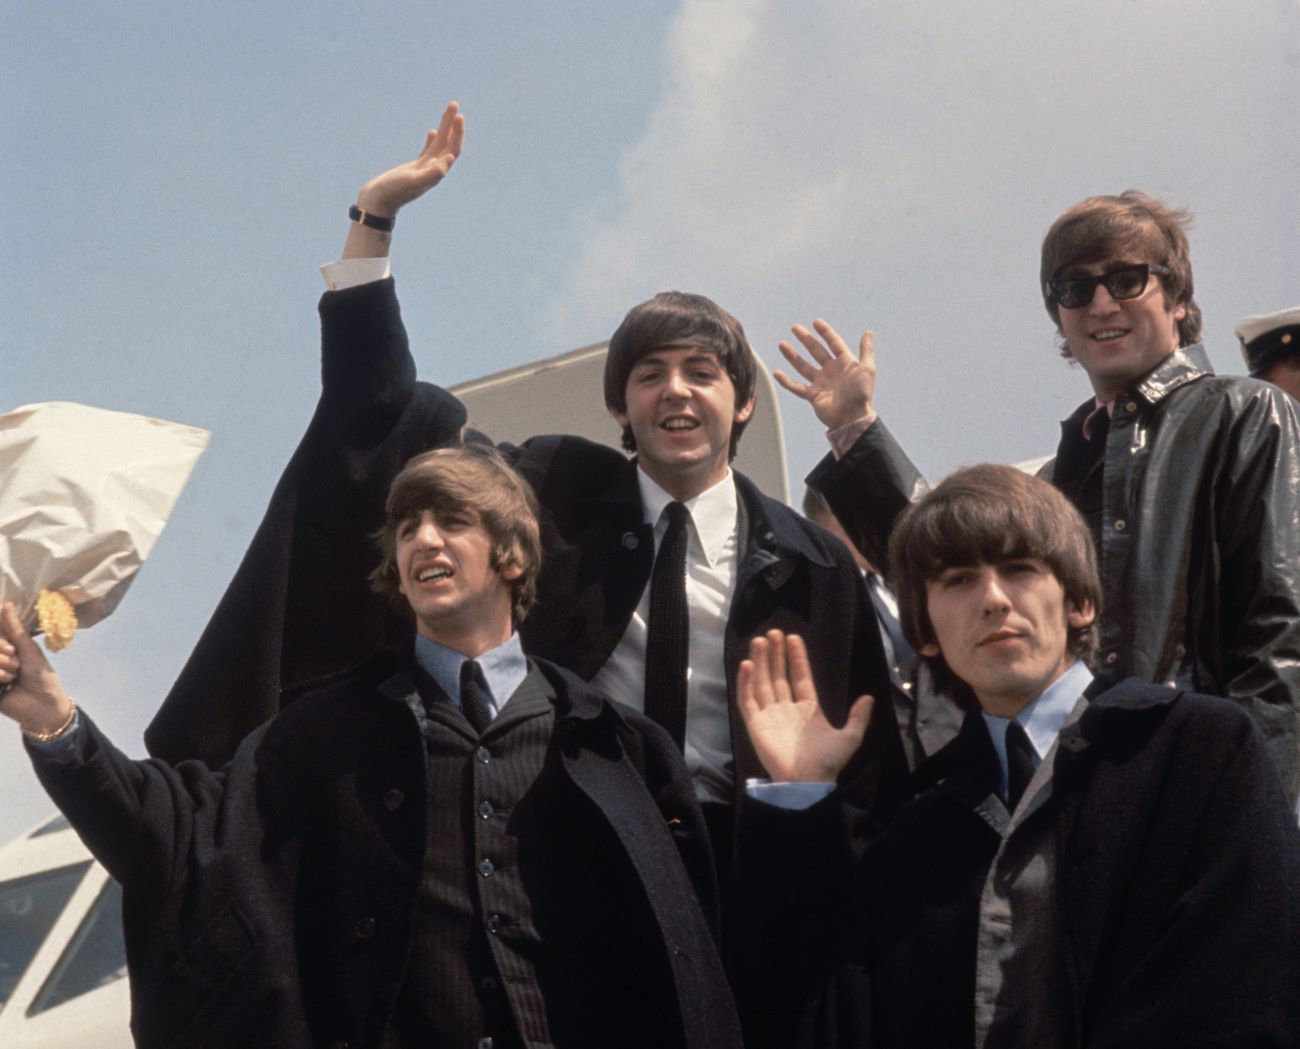 Ringo Starr, Paul McCartney, George Harrison, and John Lennon wave from the entrance to a plane. 